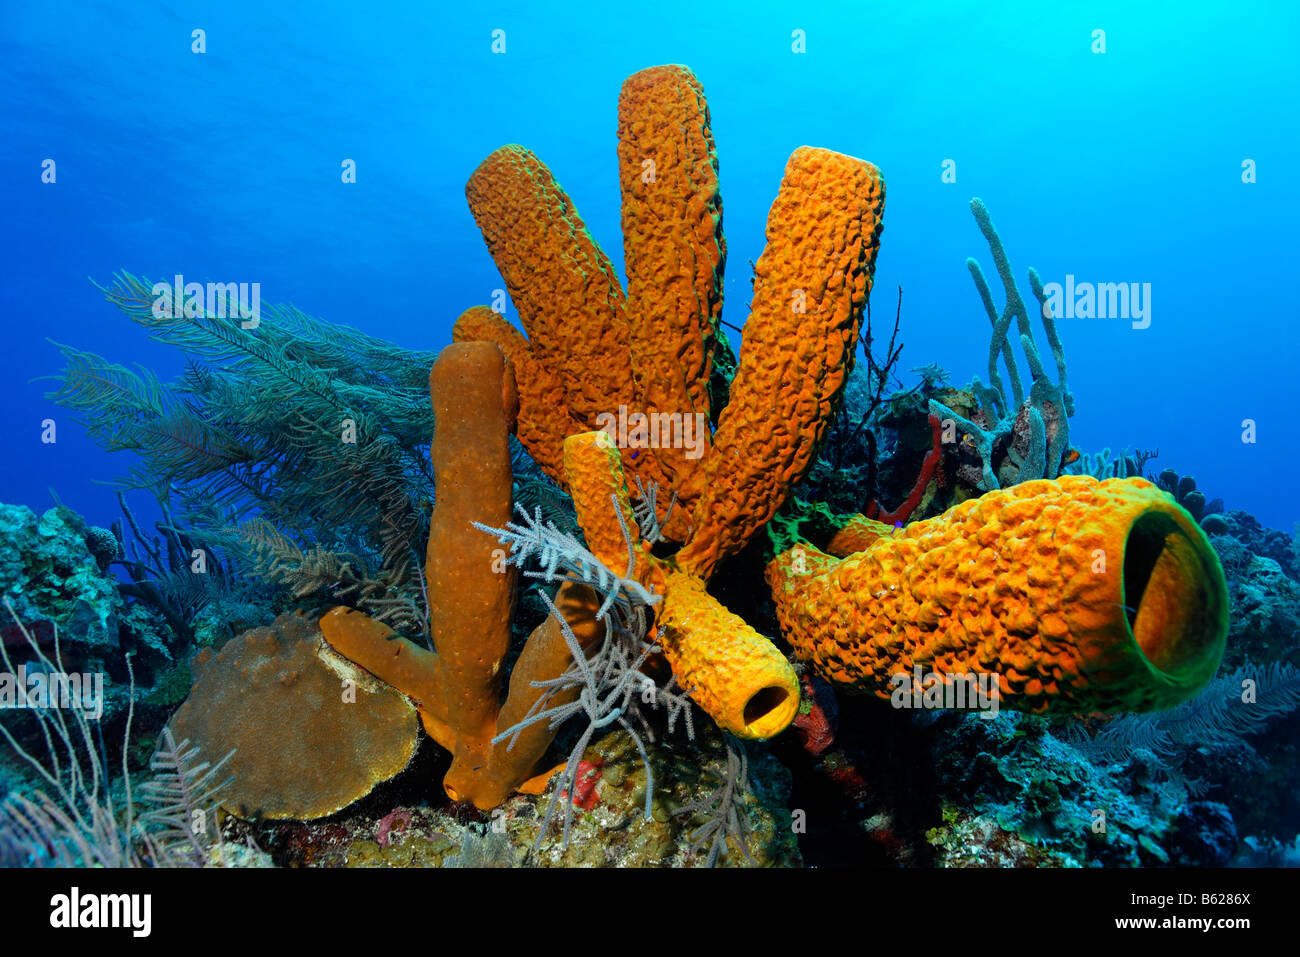 Large Aplysina fistularis sponge (Aplysina fistularis) in a coral reef with various types of coral, Turneffe Atoll, Belize, Cen Stock Photo